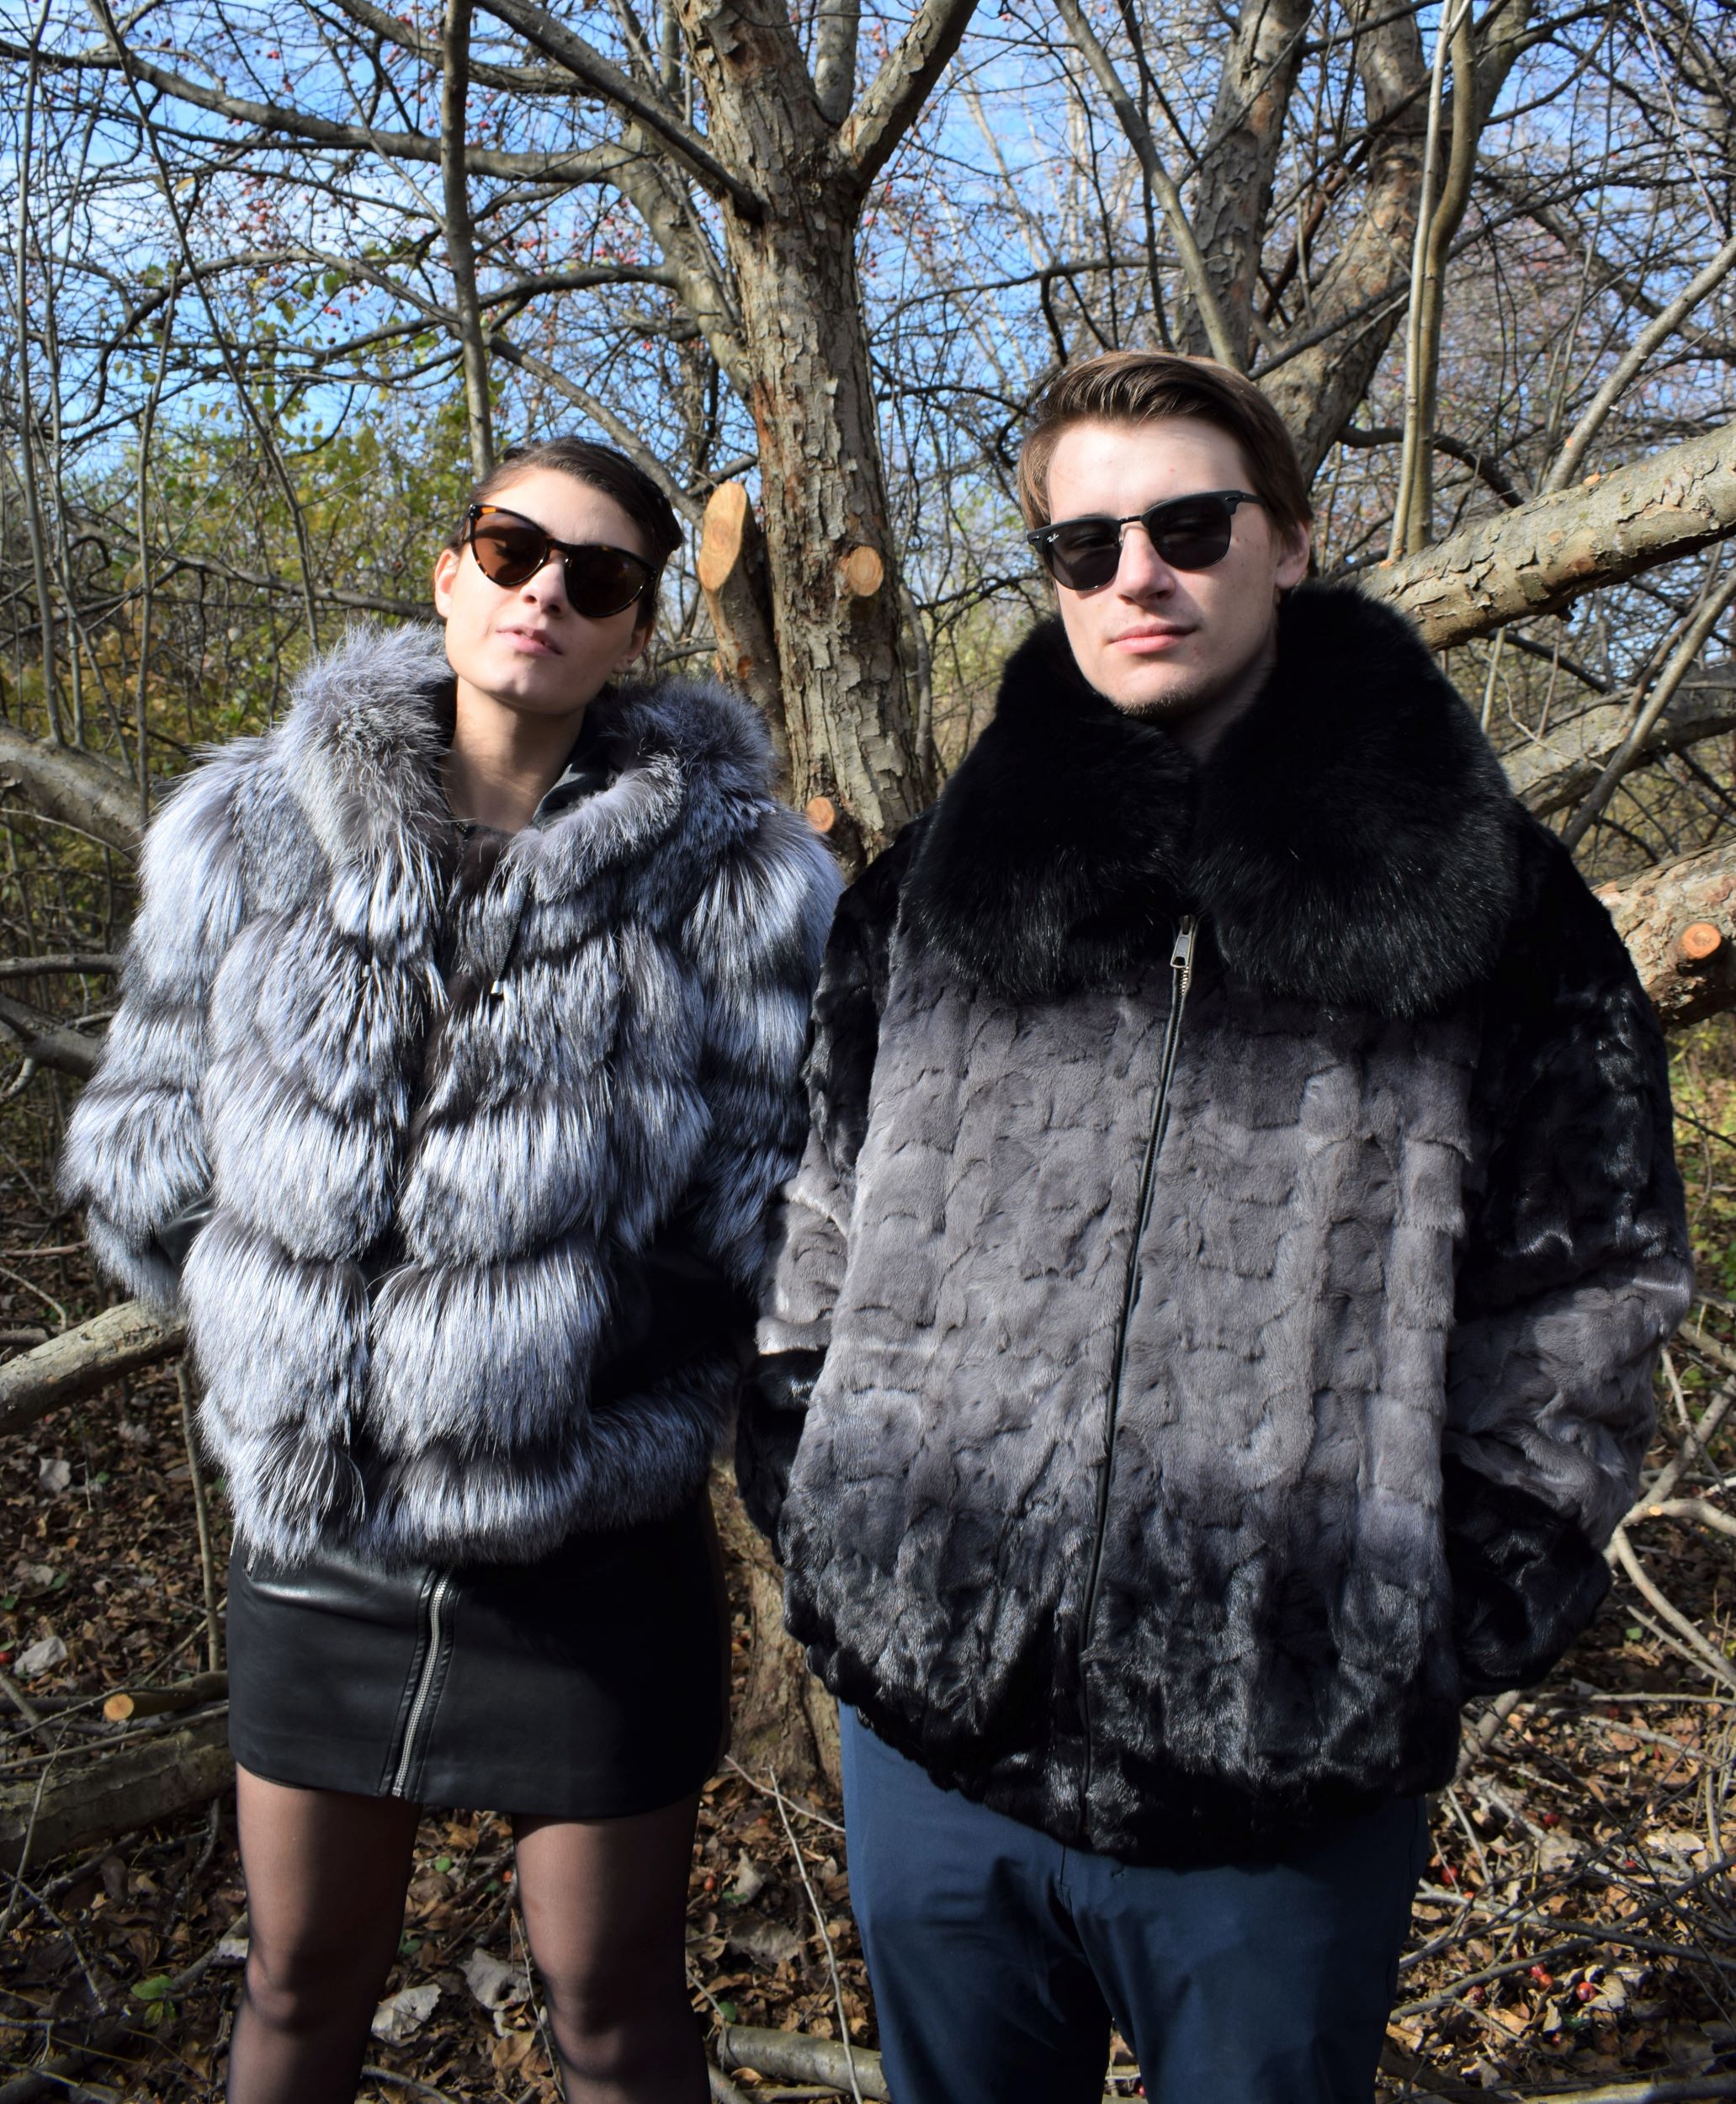 A male and female standing together in a wooded area while wearing black and grey fur jackets